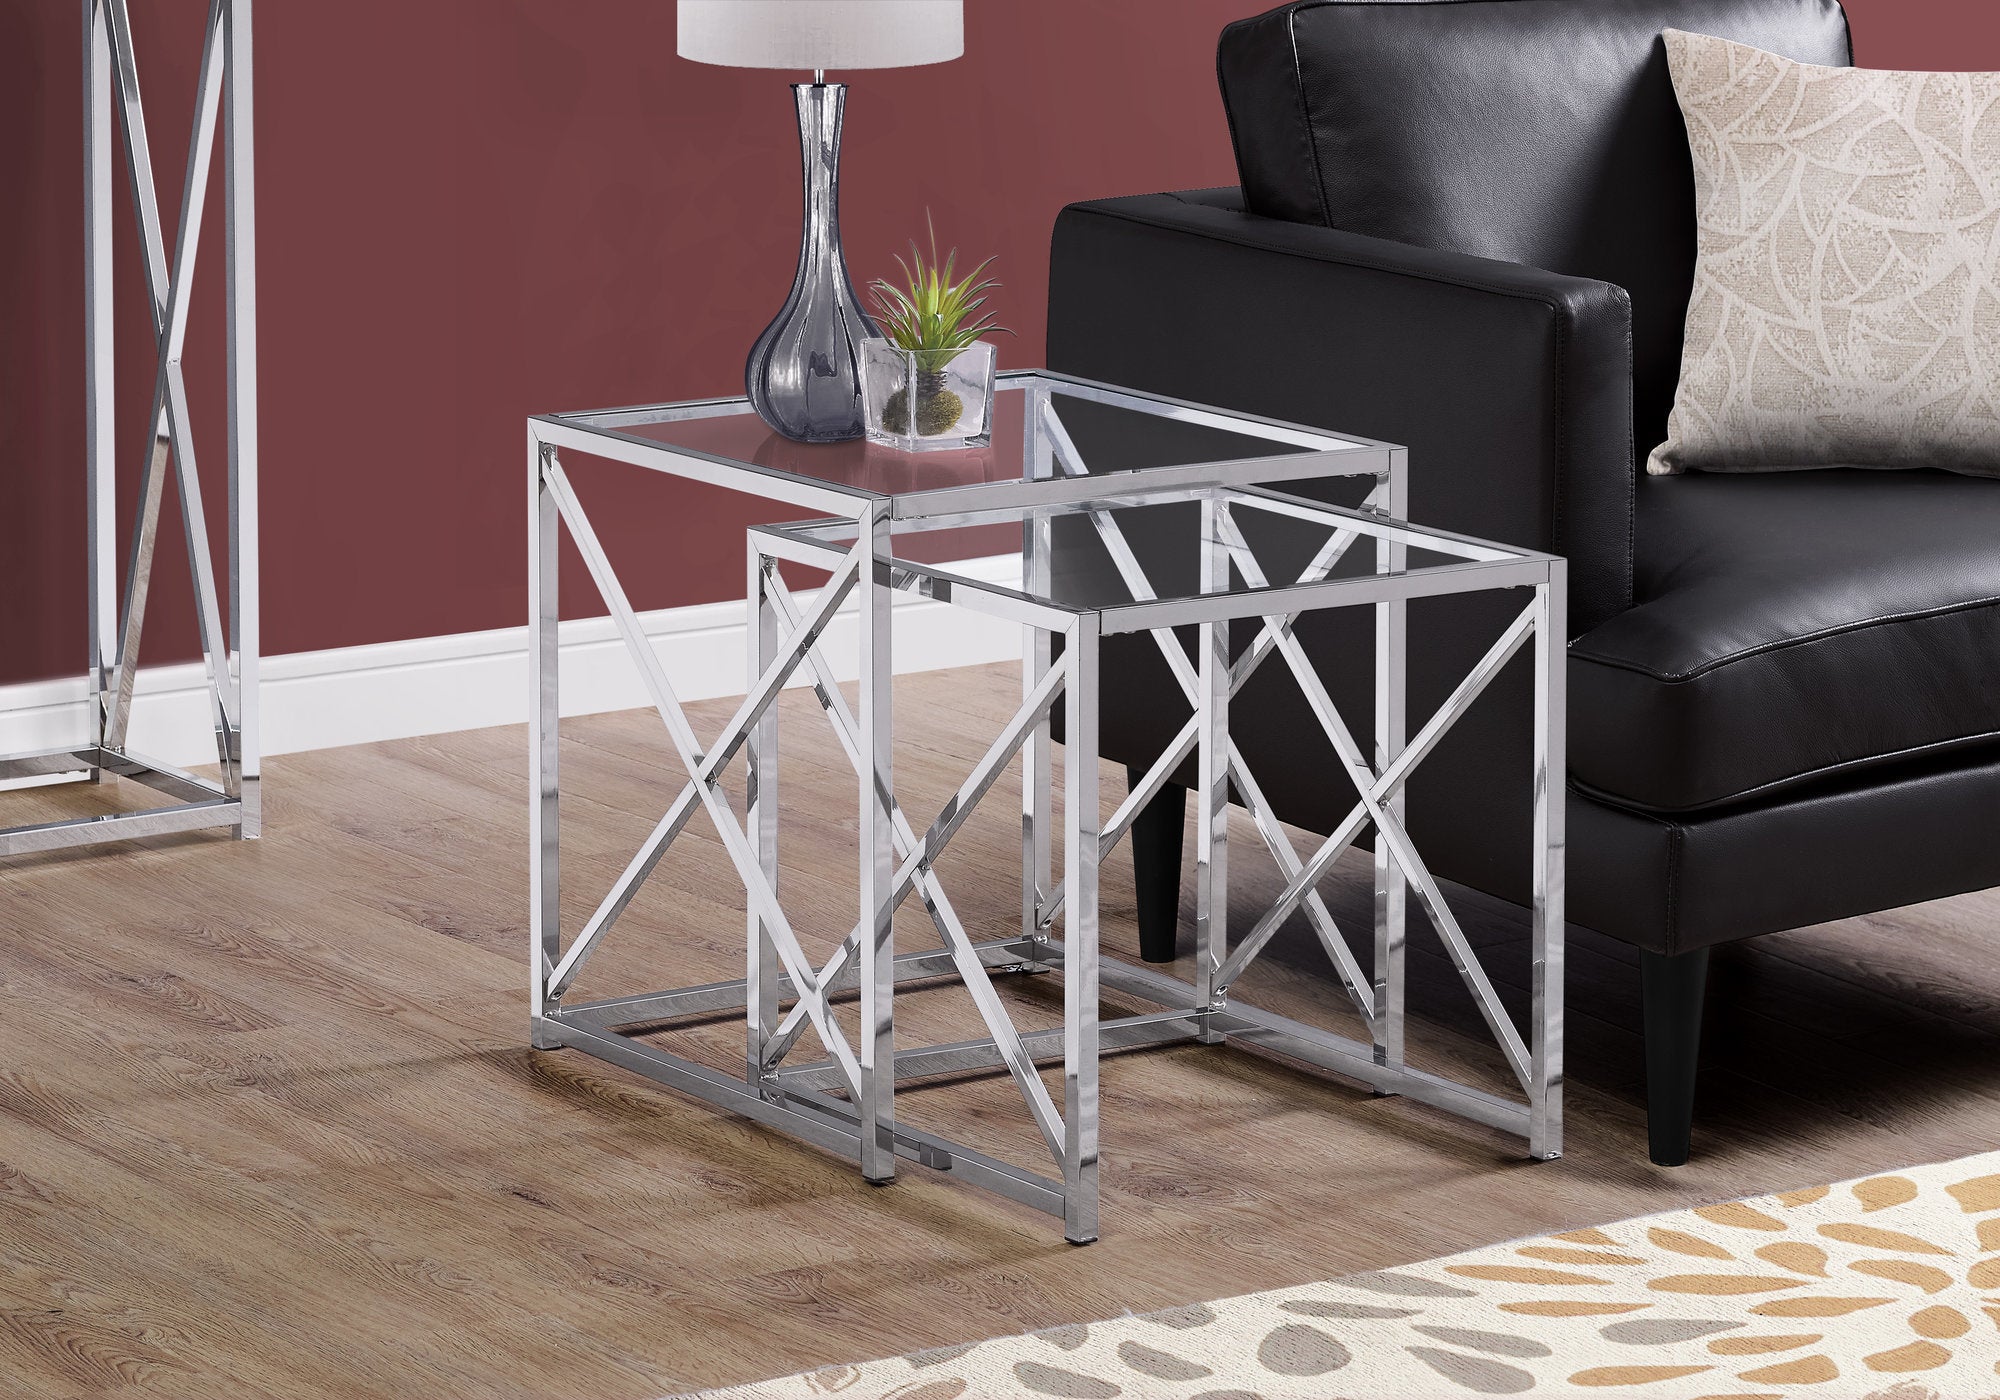 MN-633441    Nesting Table, Set Of 2, Side, End, Tempered Glass, Accent, Living Room, Bedroom, Metal Base, Tempered Glass, Chrome, Clear, Contemporary, Modern